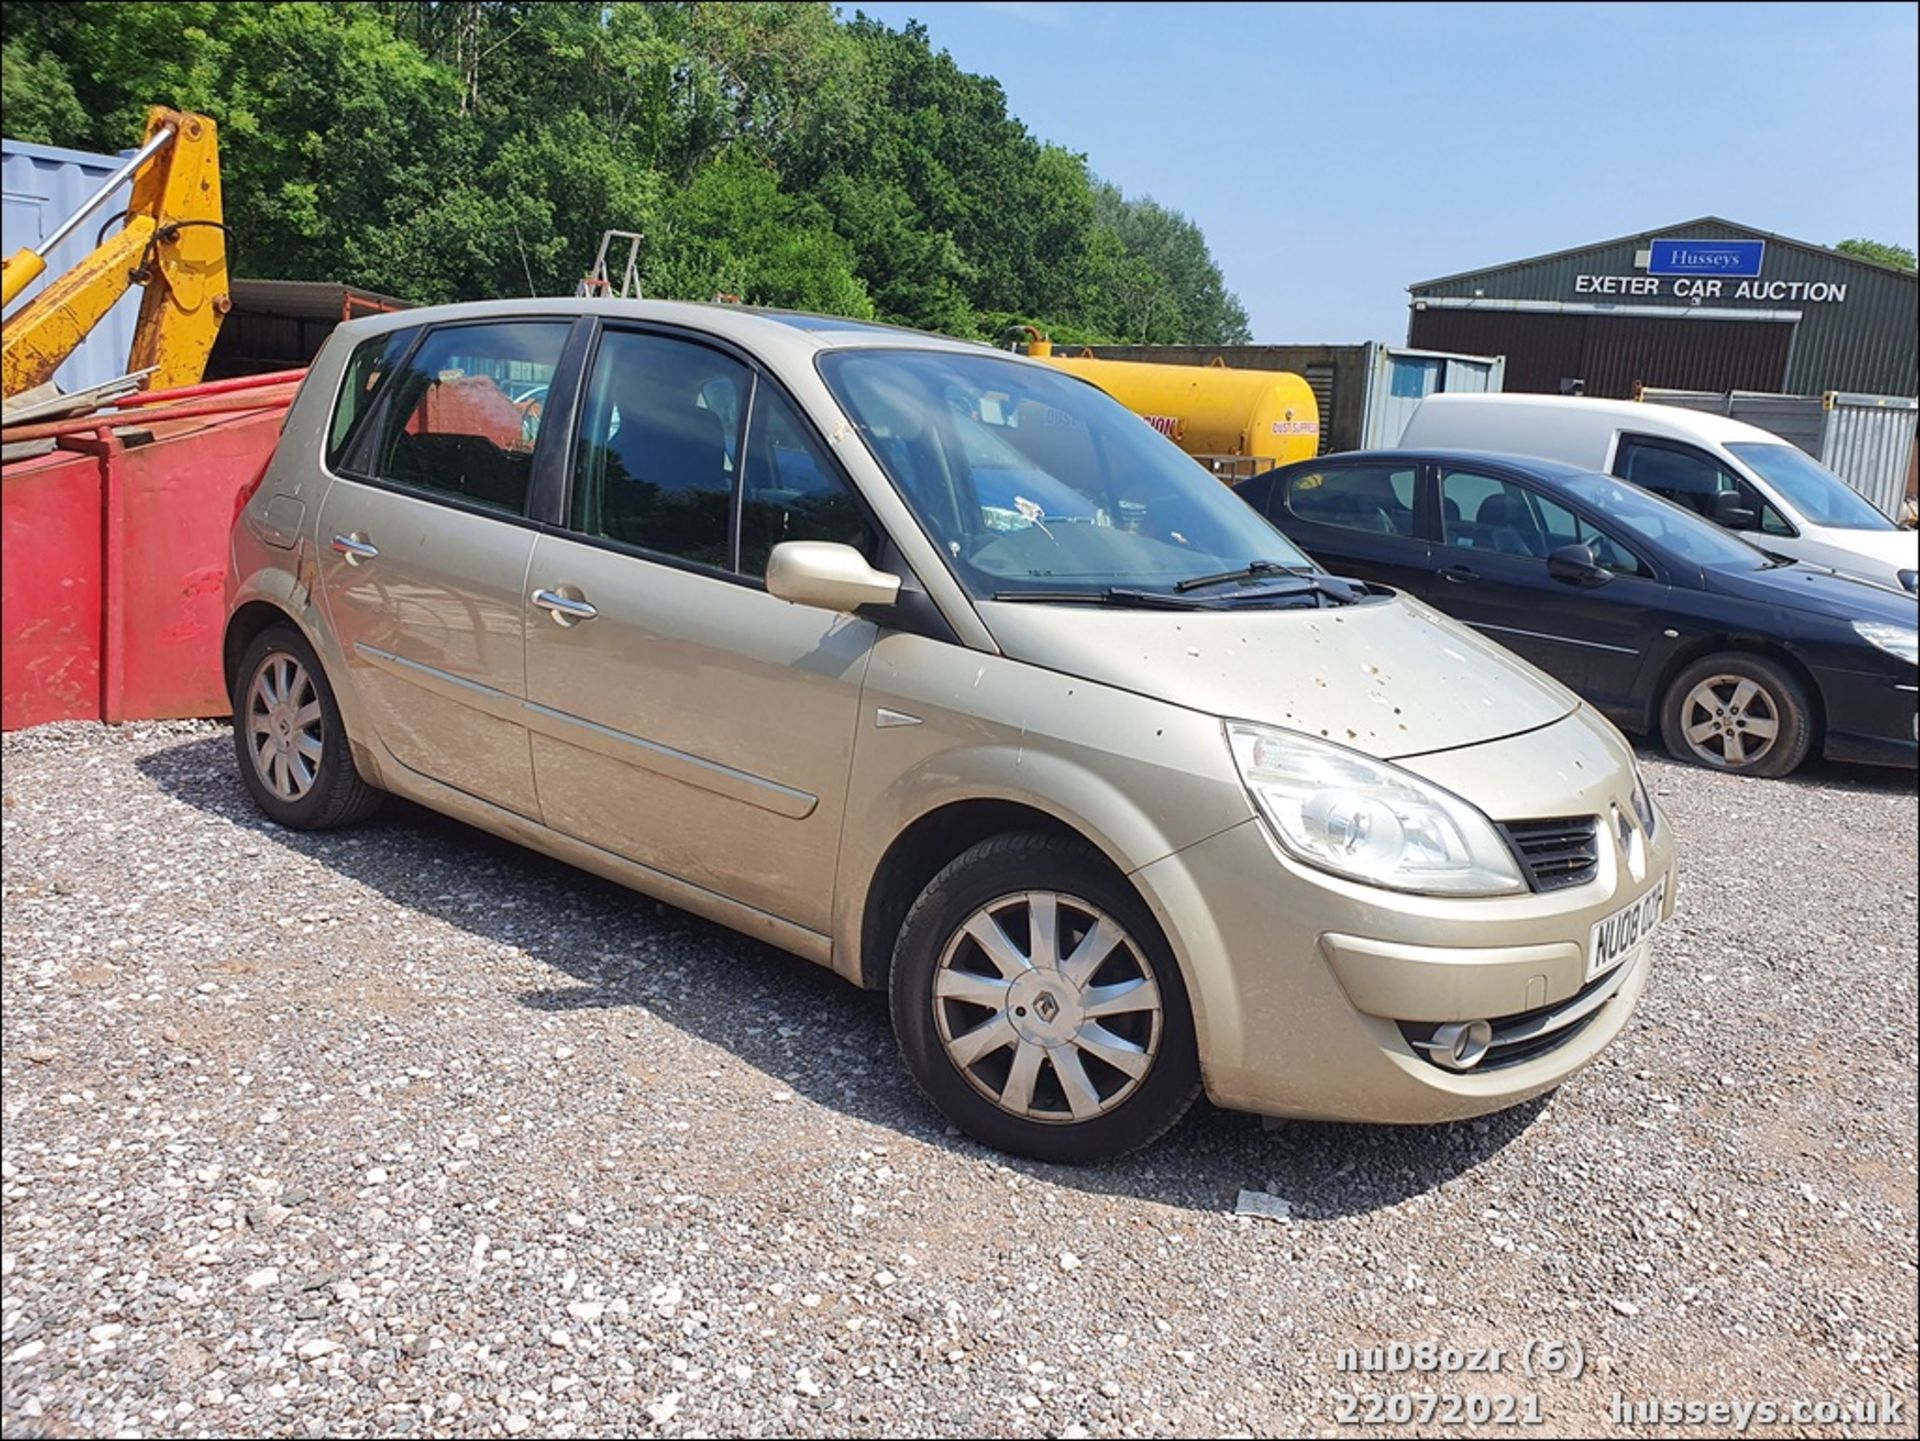 08/08 RENAULT SCENIC DYN DCI 106 - 1461cc 5dr MPV (Gold) - Image 7 of 16